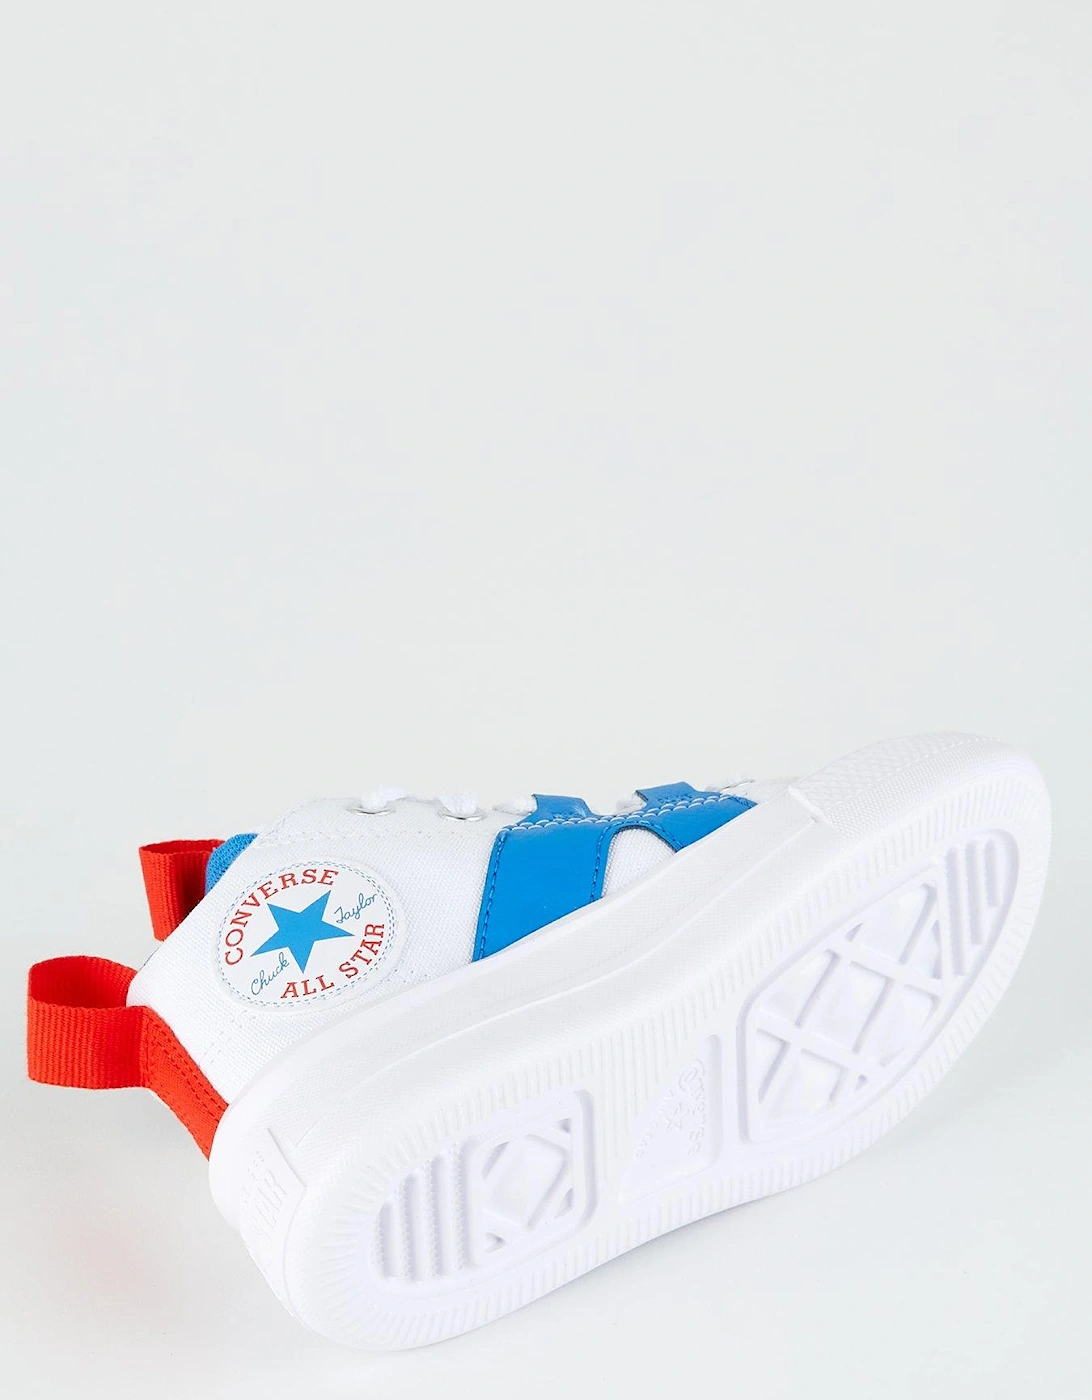 Kids Unisex Ultra Mid Trainers - White/Blue